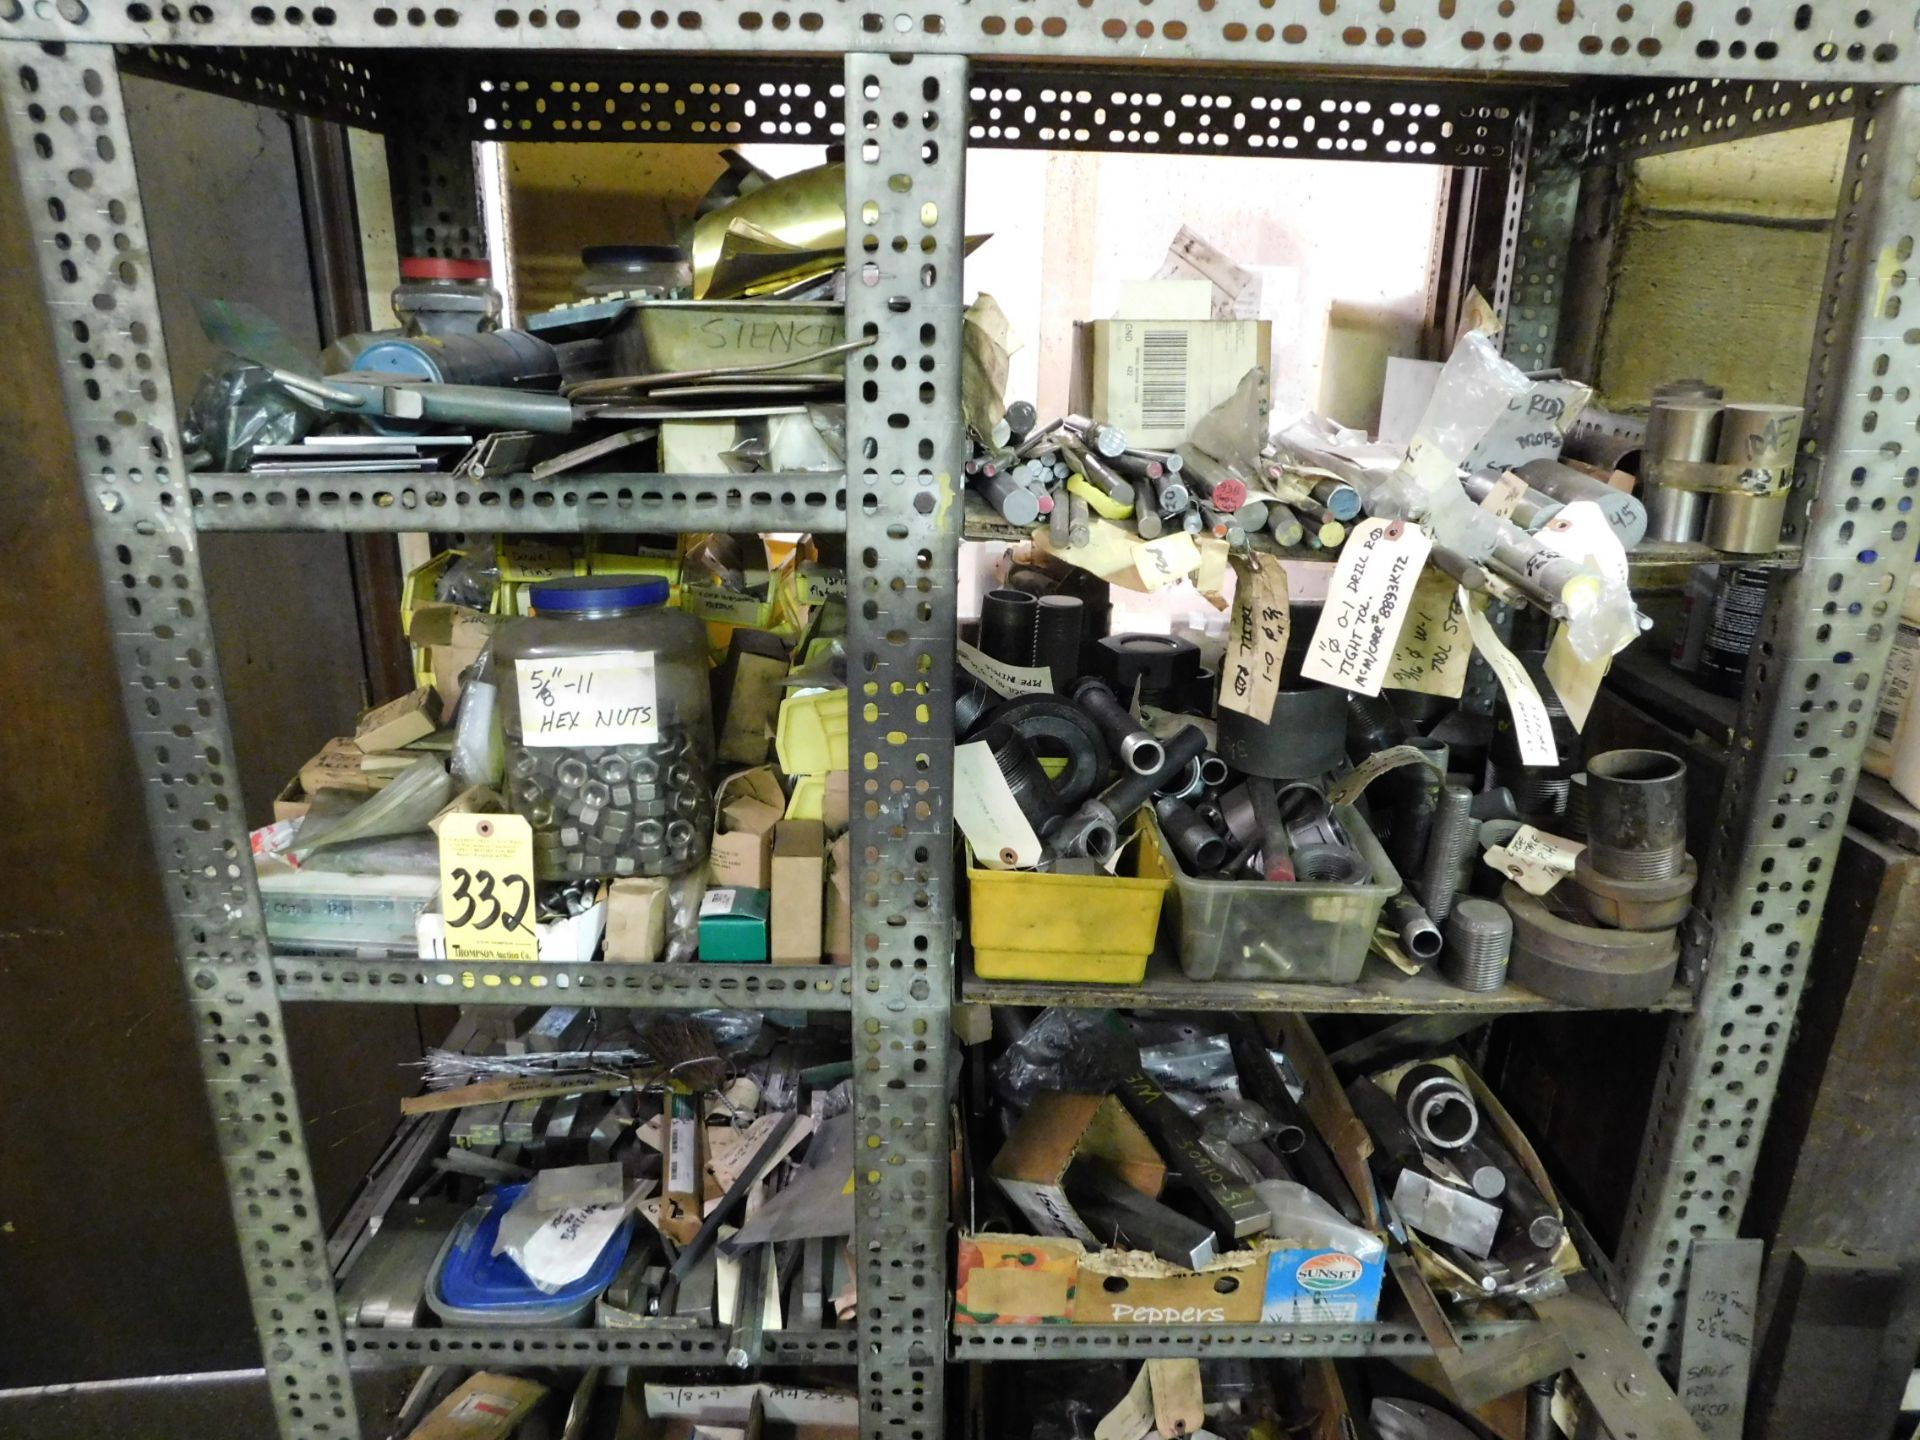 Shelving and Contents of Miscellaneous Hardware - Image 2 of 3